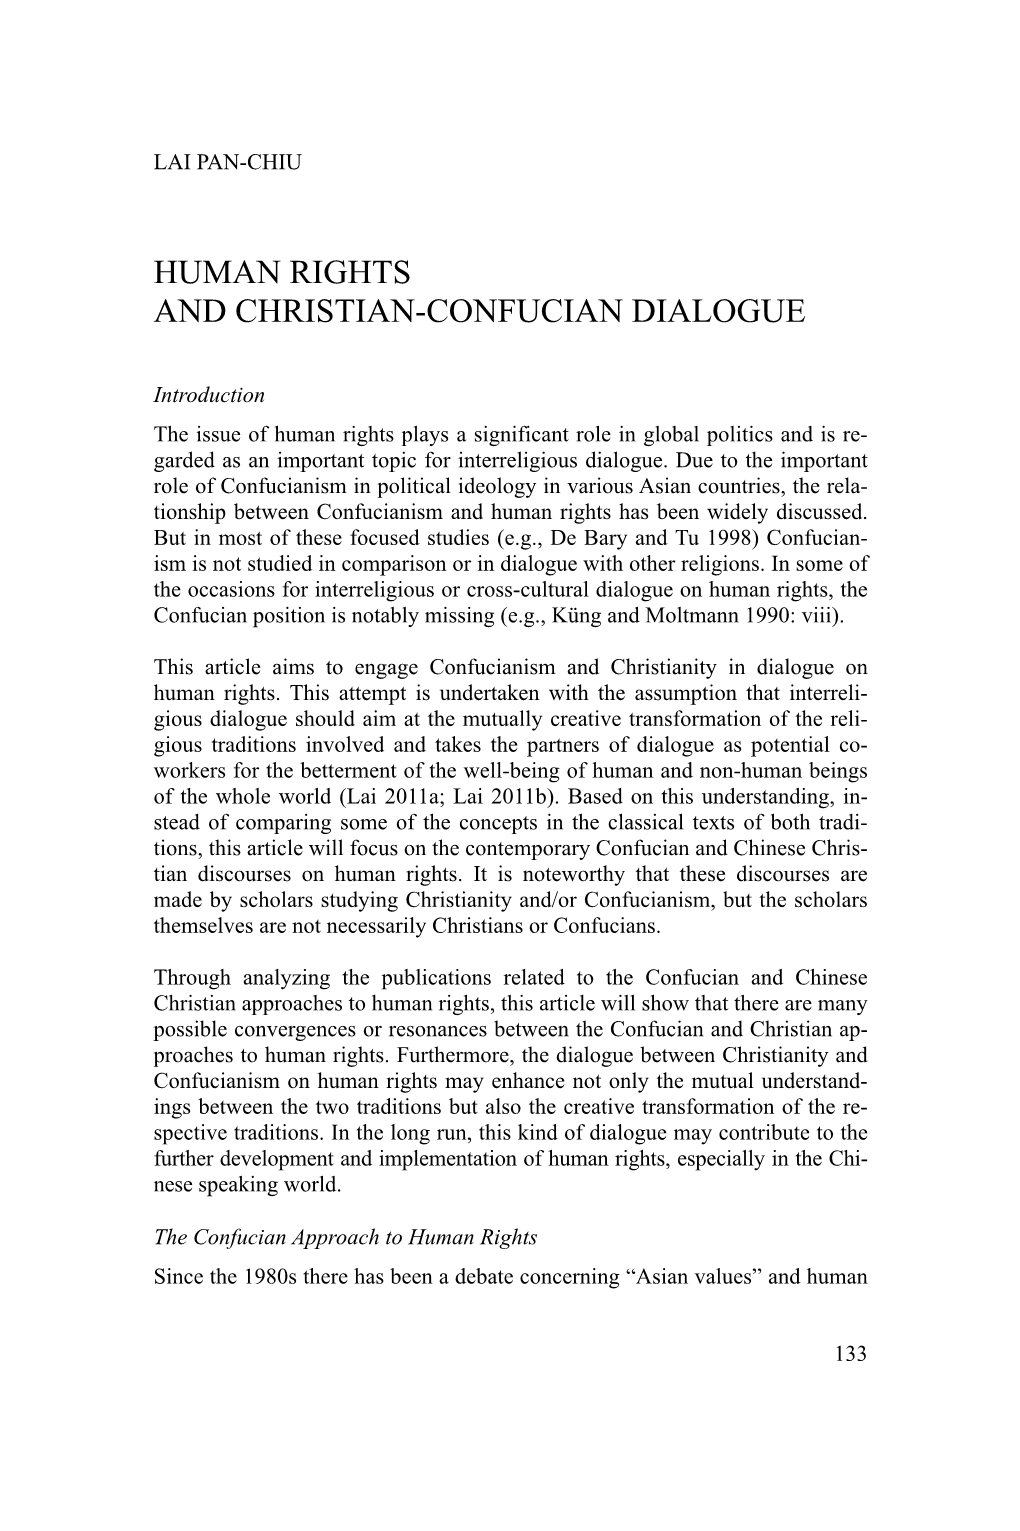 Human Rights and Christian-Confucian Dialogue